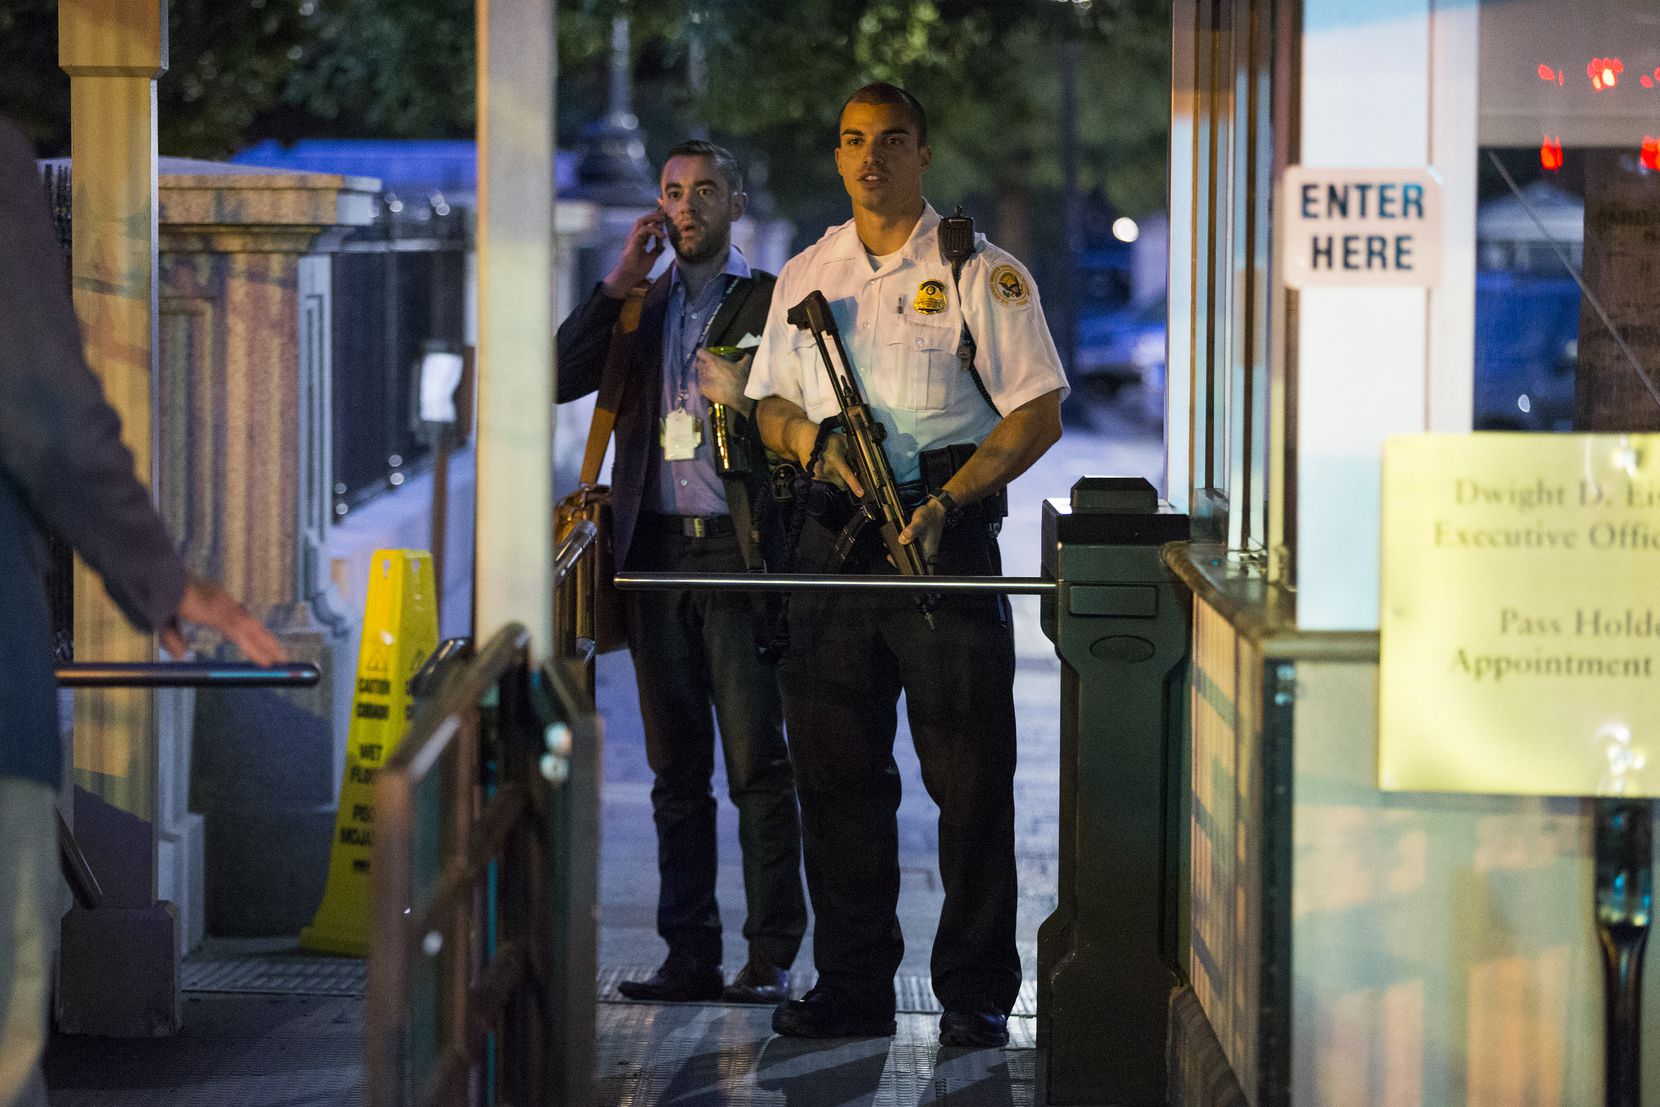 A Secret Service police officer holds a weapon as he stands near an entrance to the White...